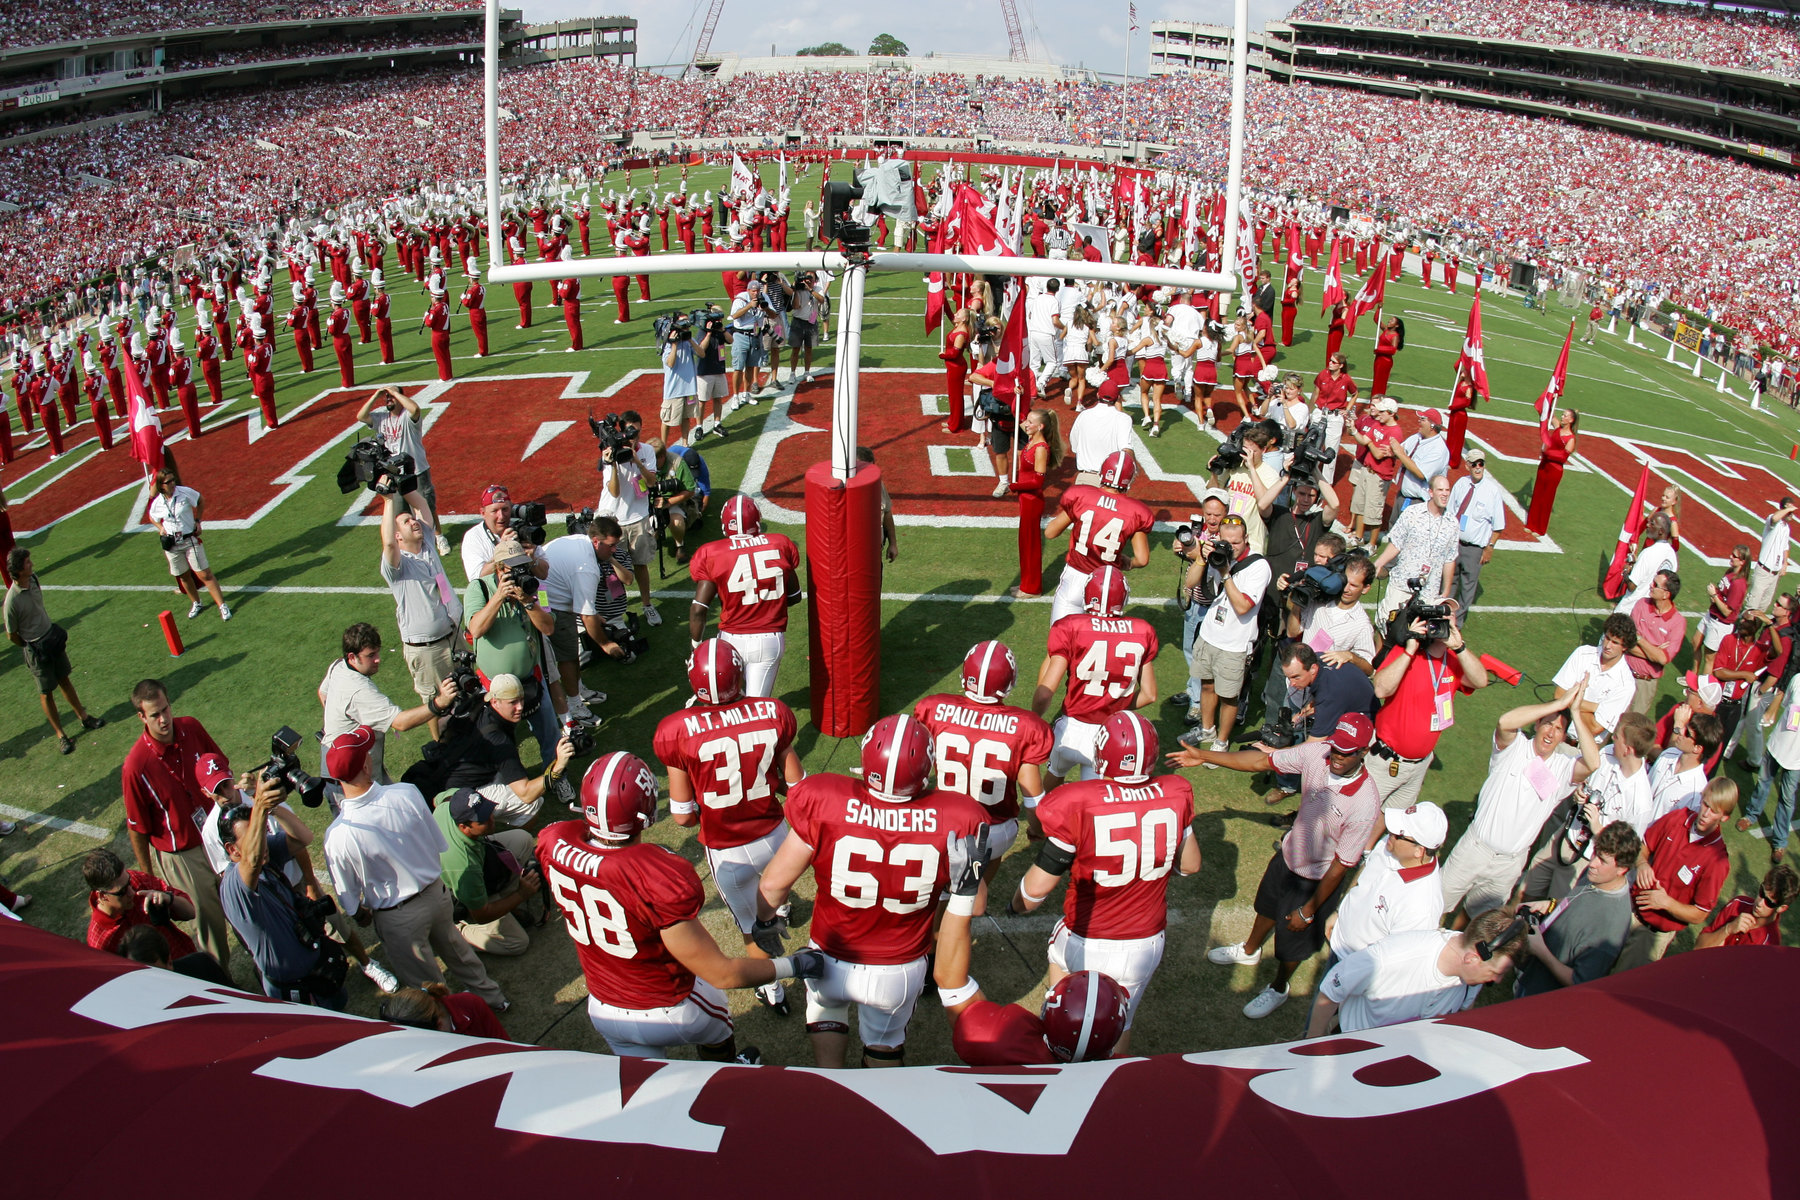 Alabama takes the field before the start of the game against Florida.